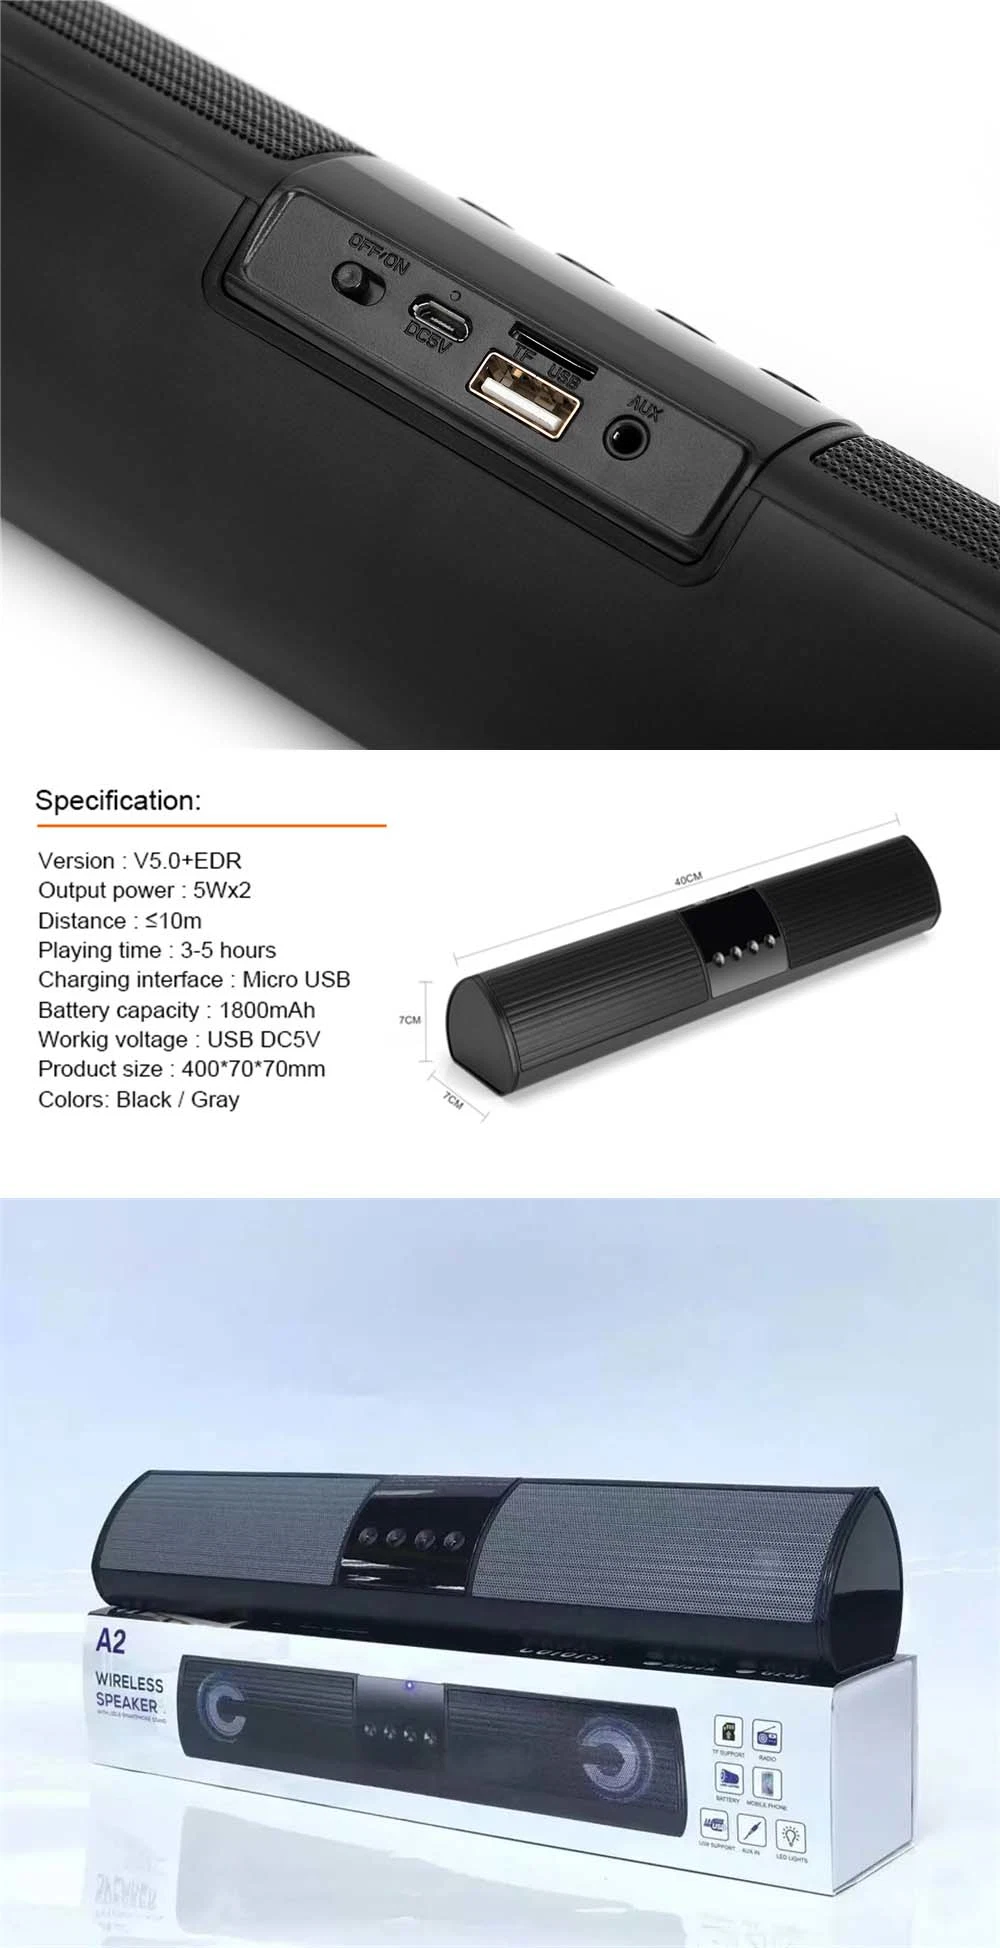 A2 Home Theater Long Strip Audio Wireless Speakers Sound Bar